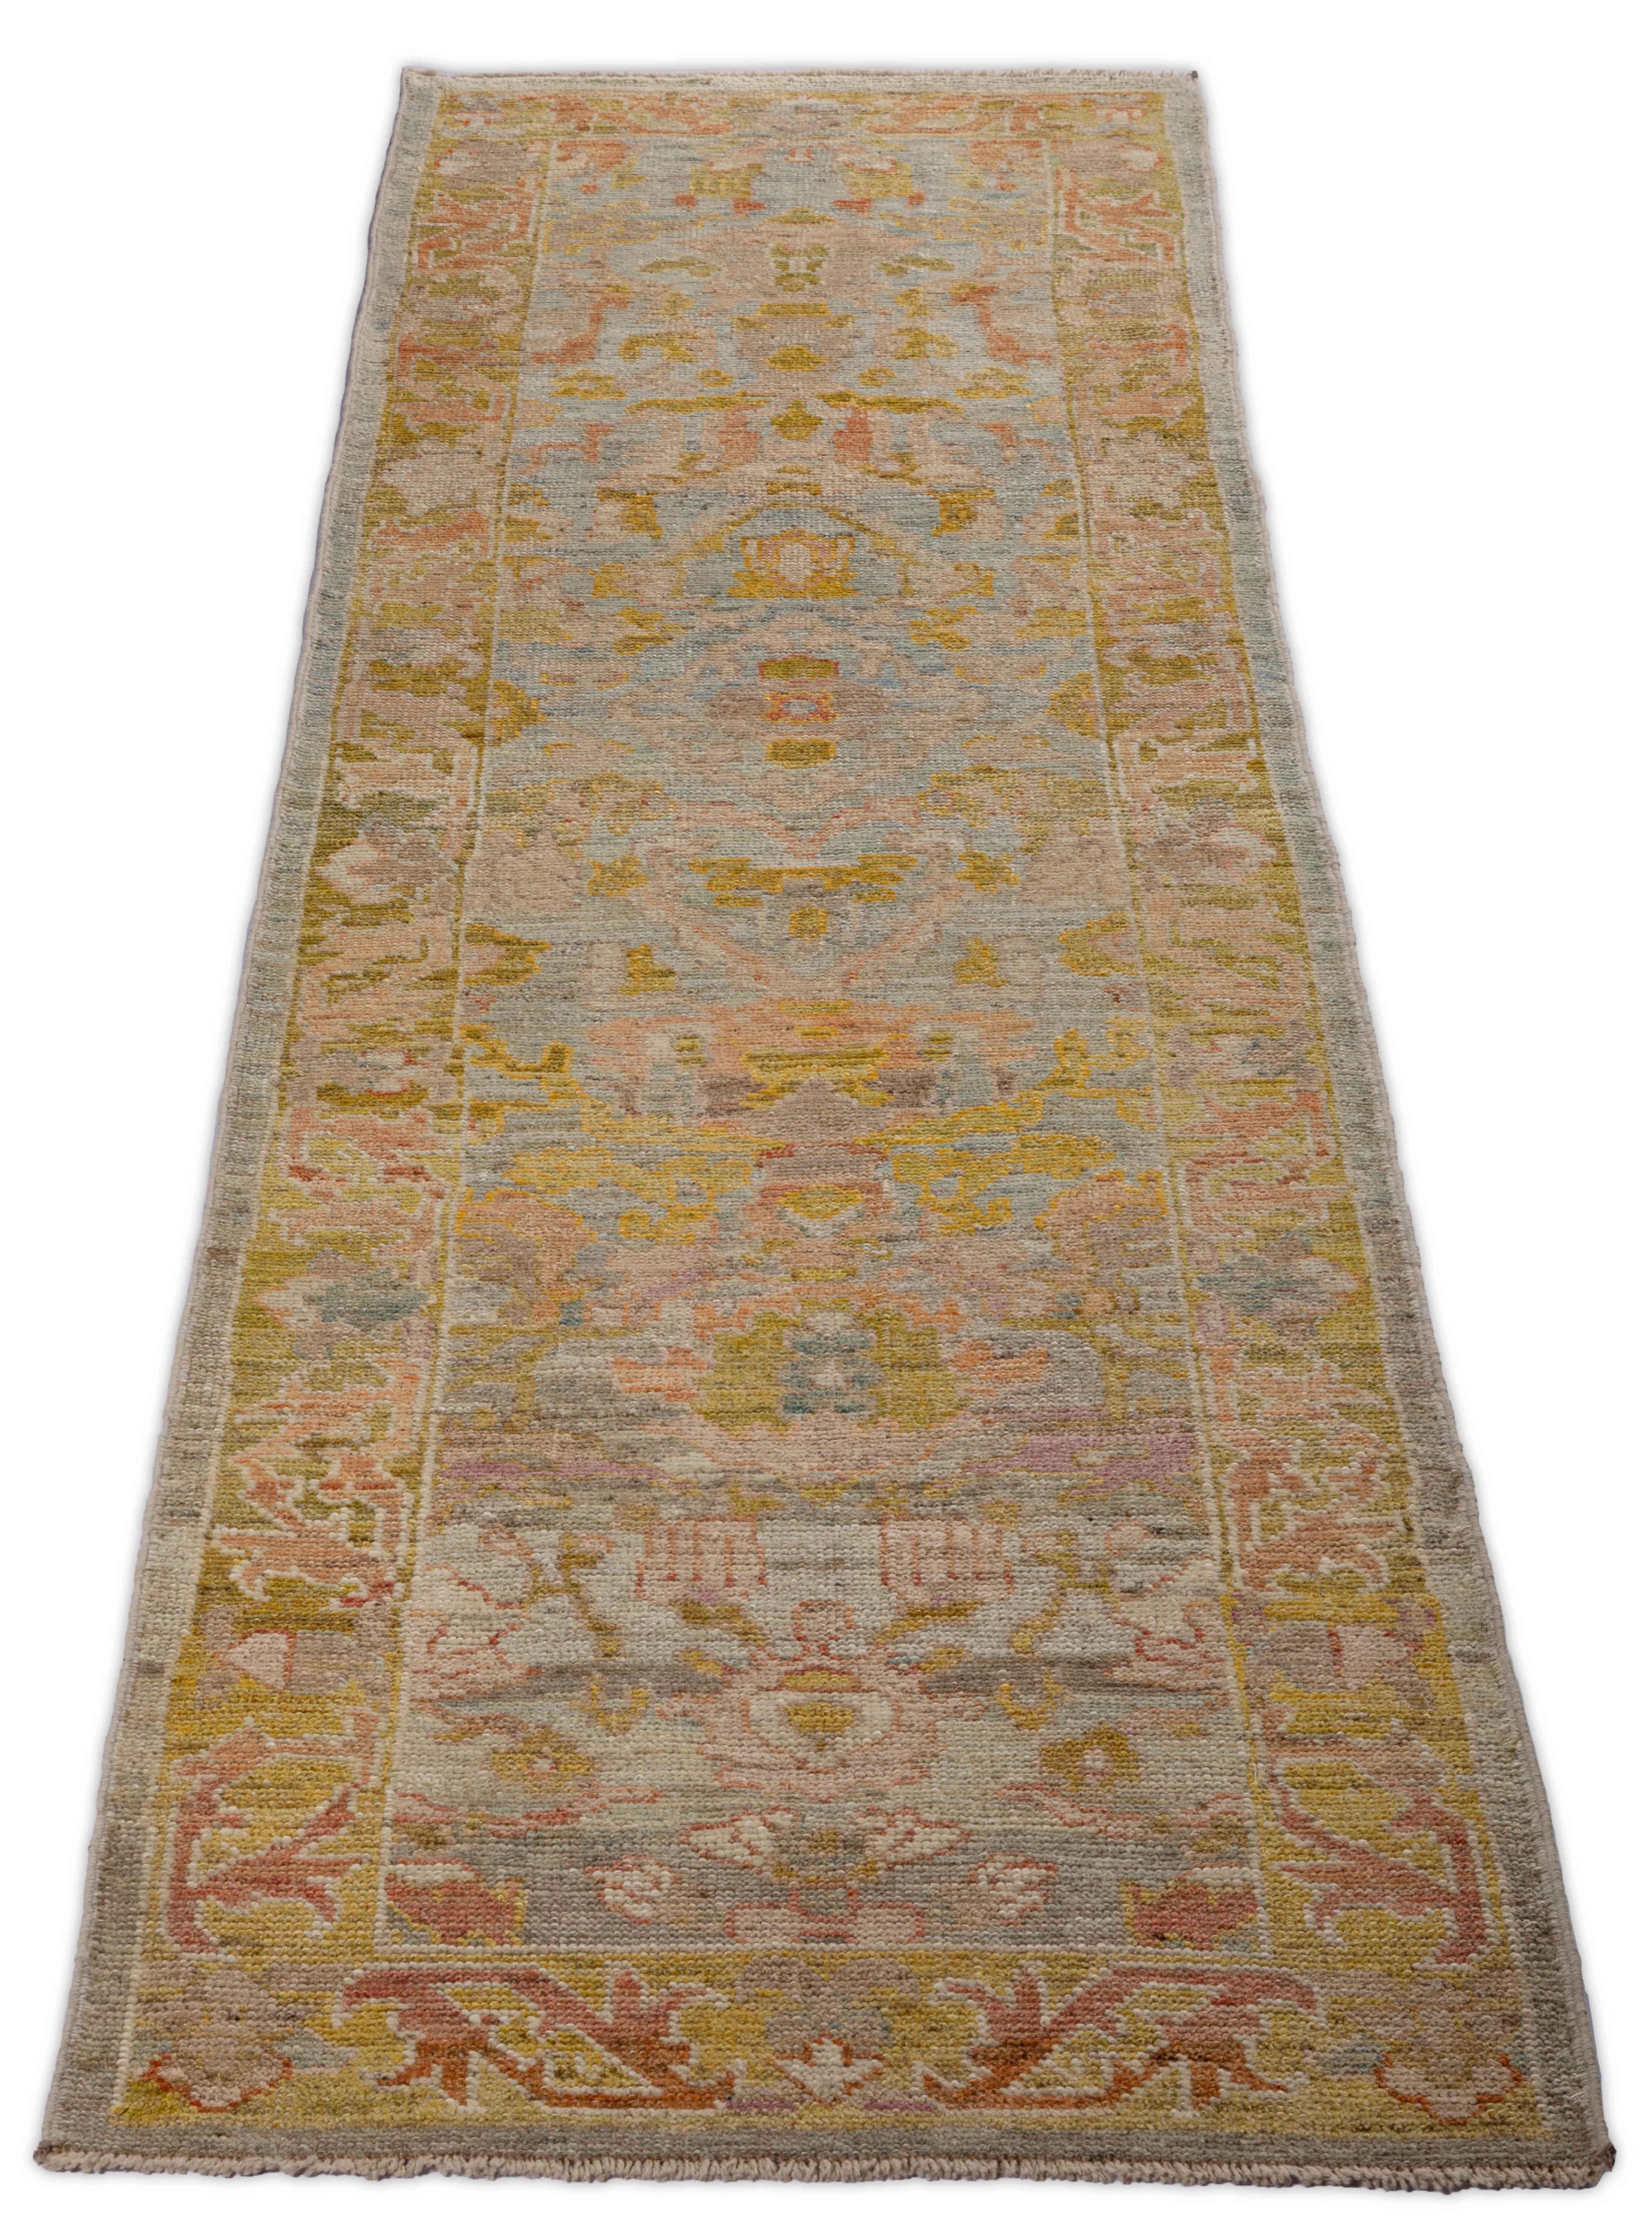  New Turkish rug made of handwoven sheep’s wool of the finest quality. It’s colored with organic vegetable dyes that are certified safe for humans and pets alike. It features a large, beige field with flower details allover in pink and gold